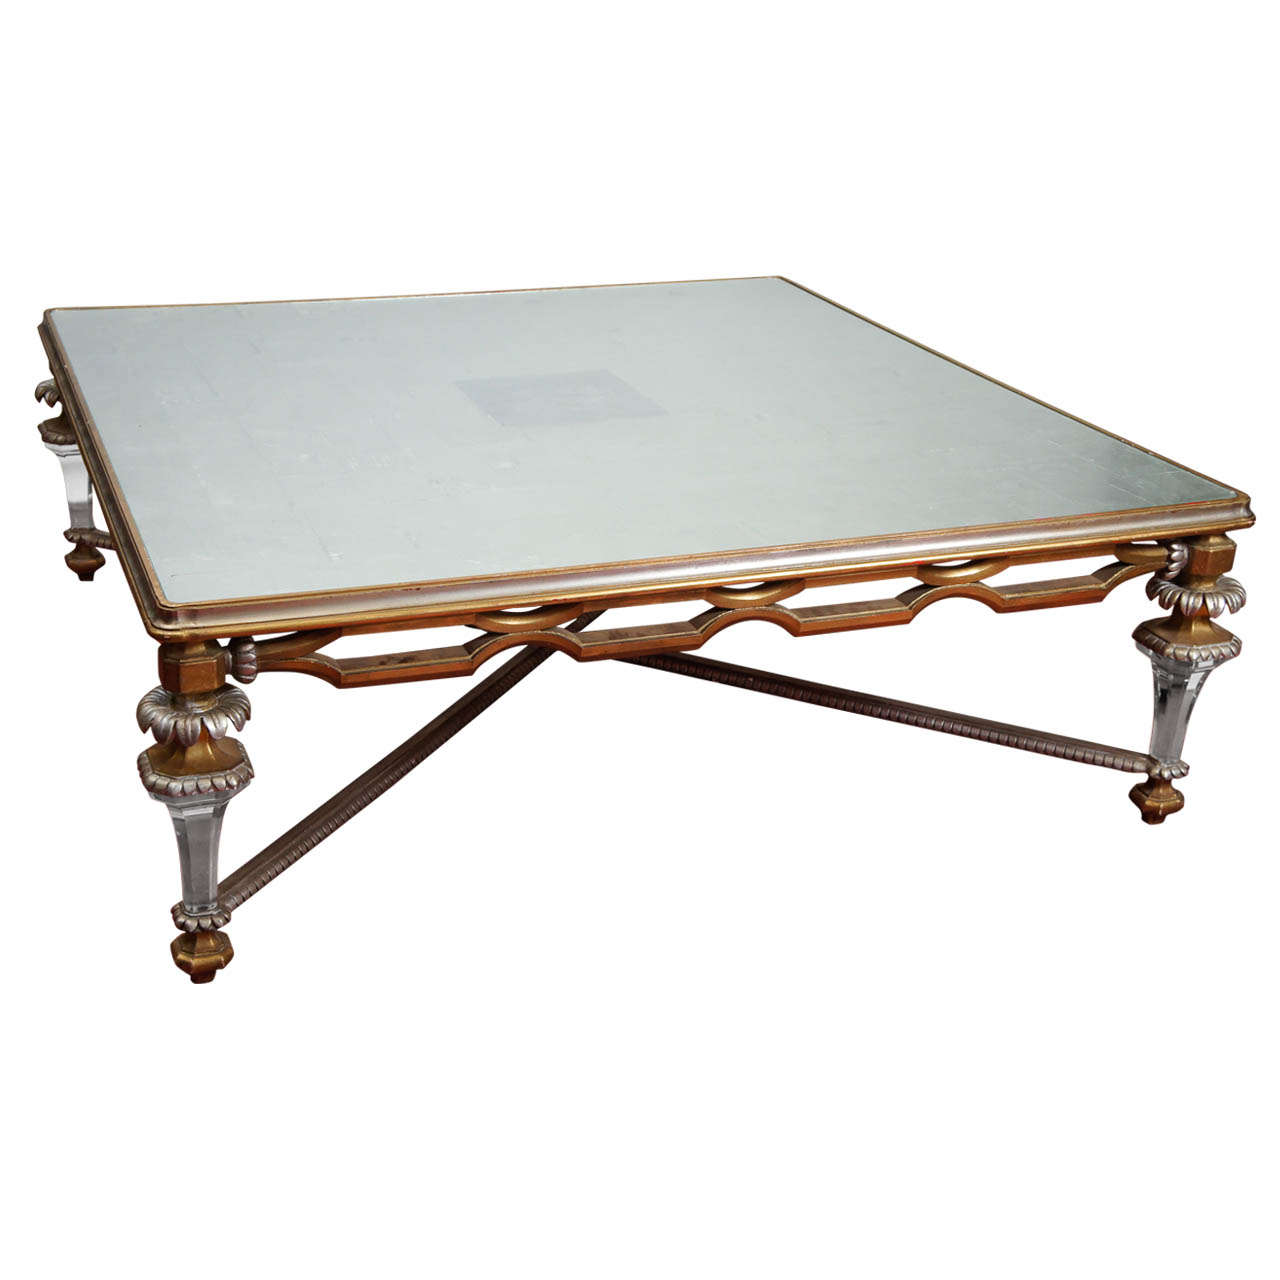 Neoclassical Revival Style Coffee Table For Sale